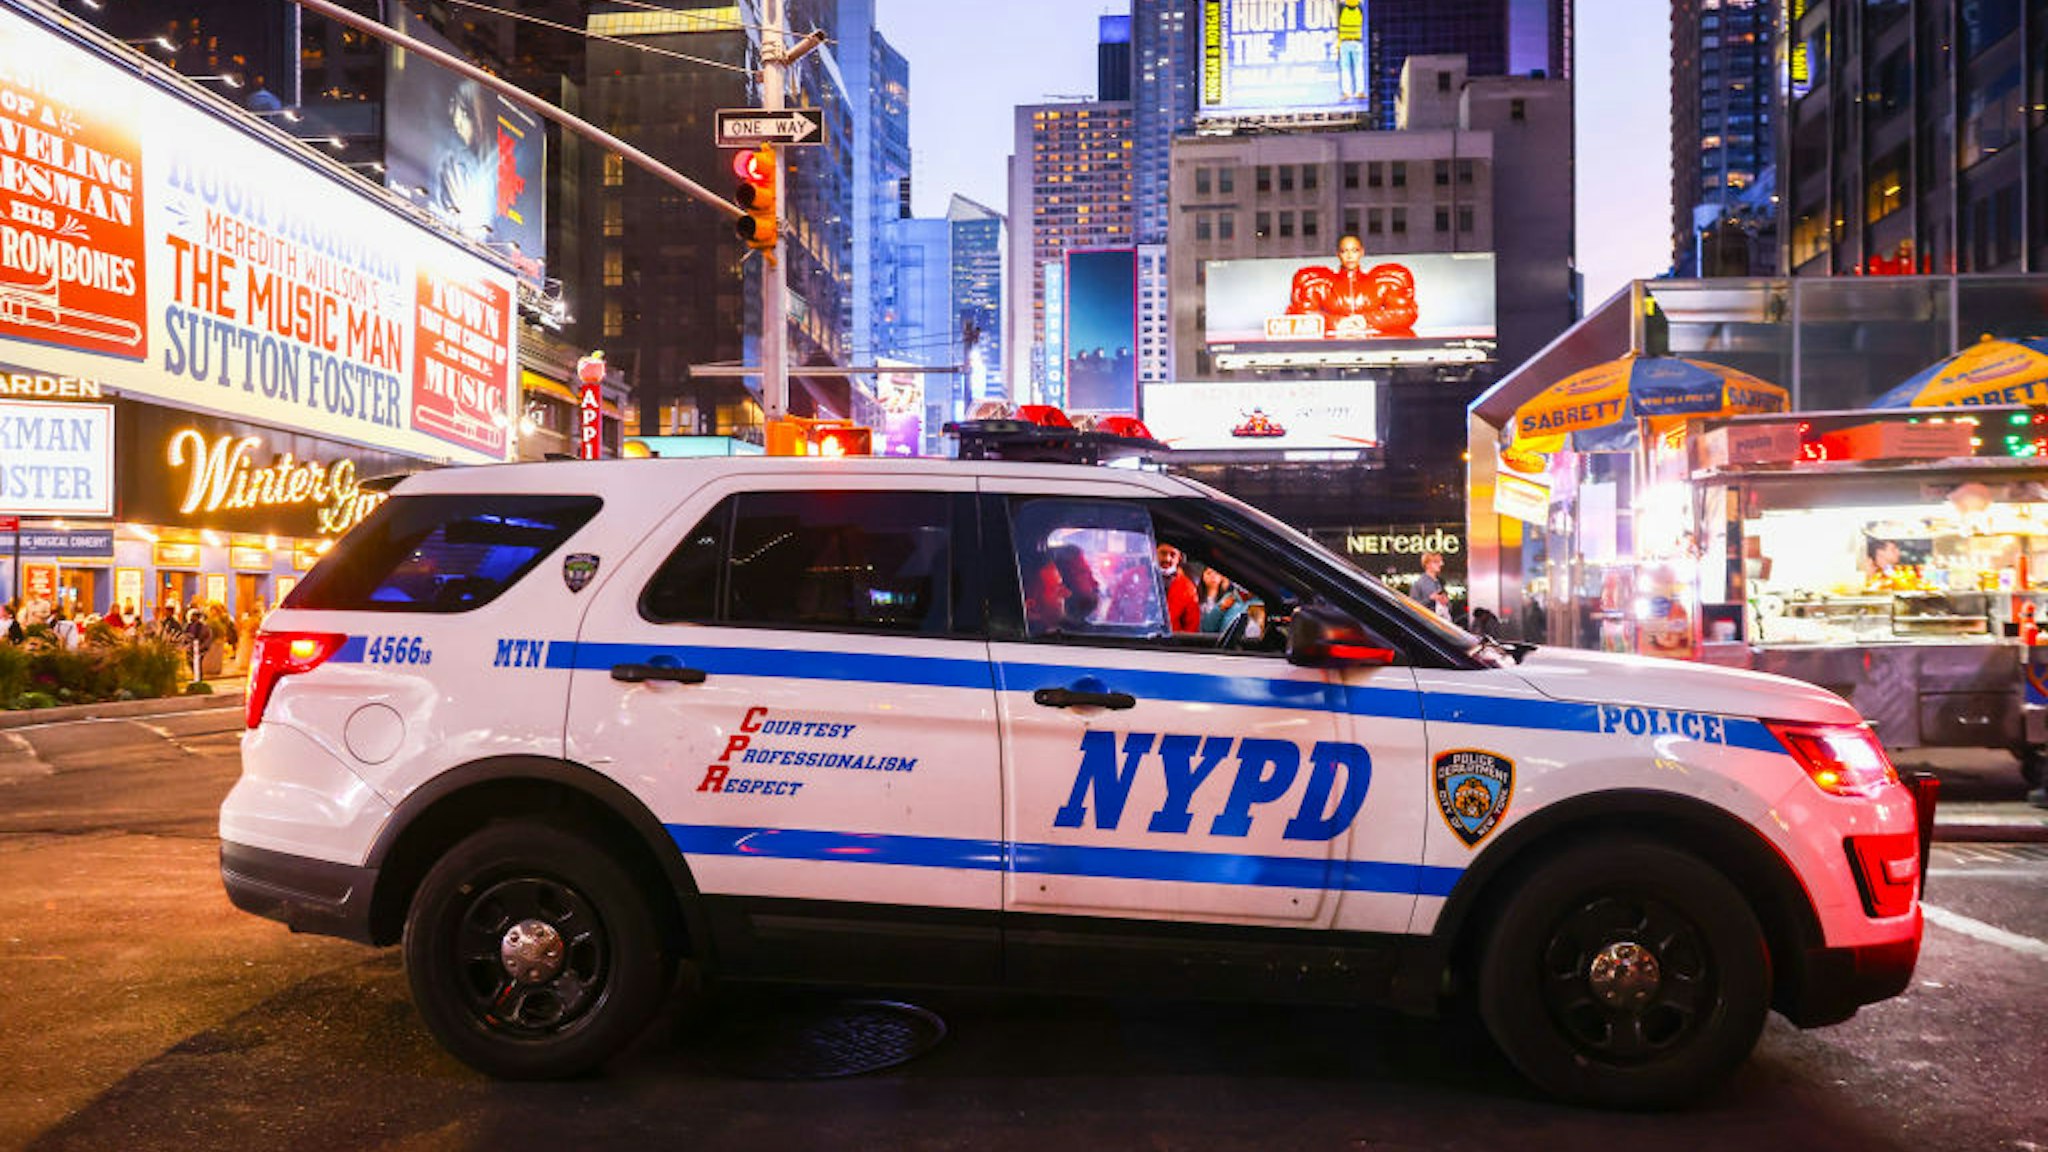 NYPD car is seen at Broadway at Midtown Manhattan in New York, United States, on October 22, 2022.